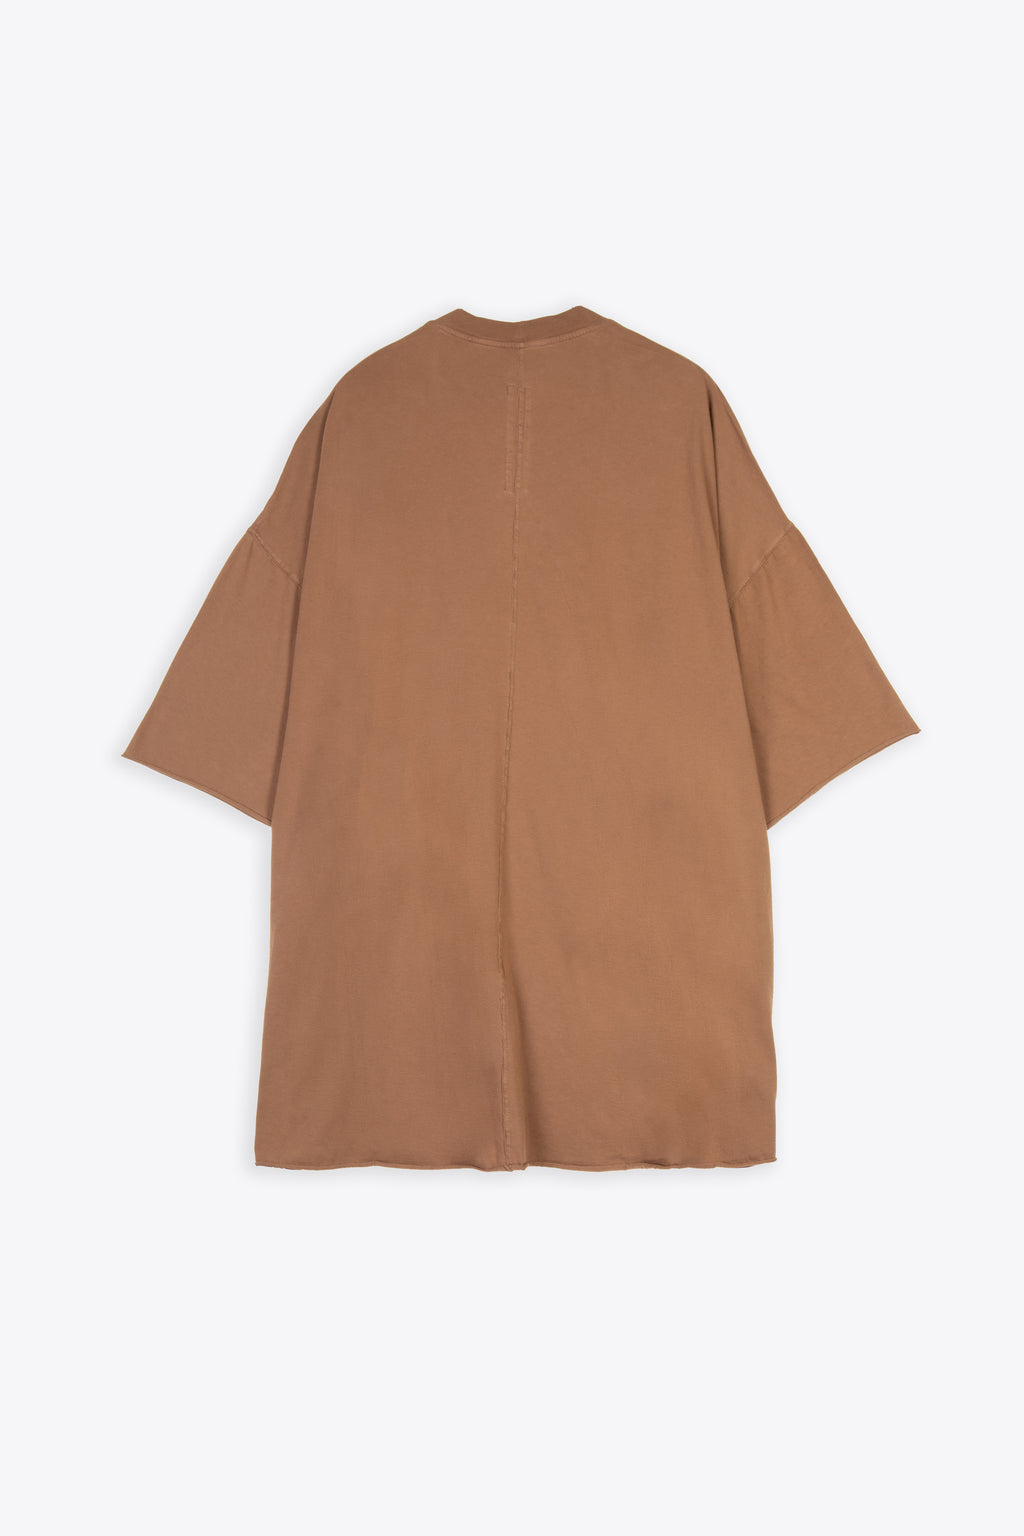 alt-image__Brown-cotton-oversized-t-shirt-with-raw-cut-hems---Tommy-T